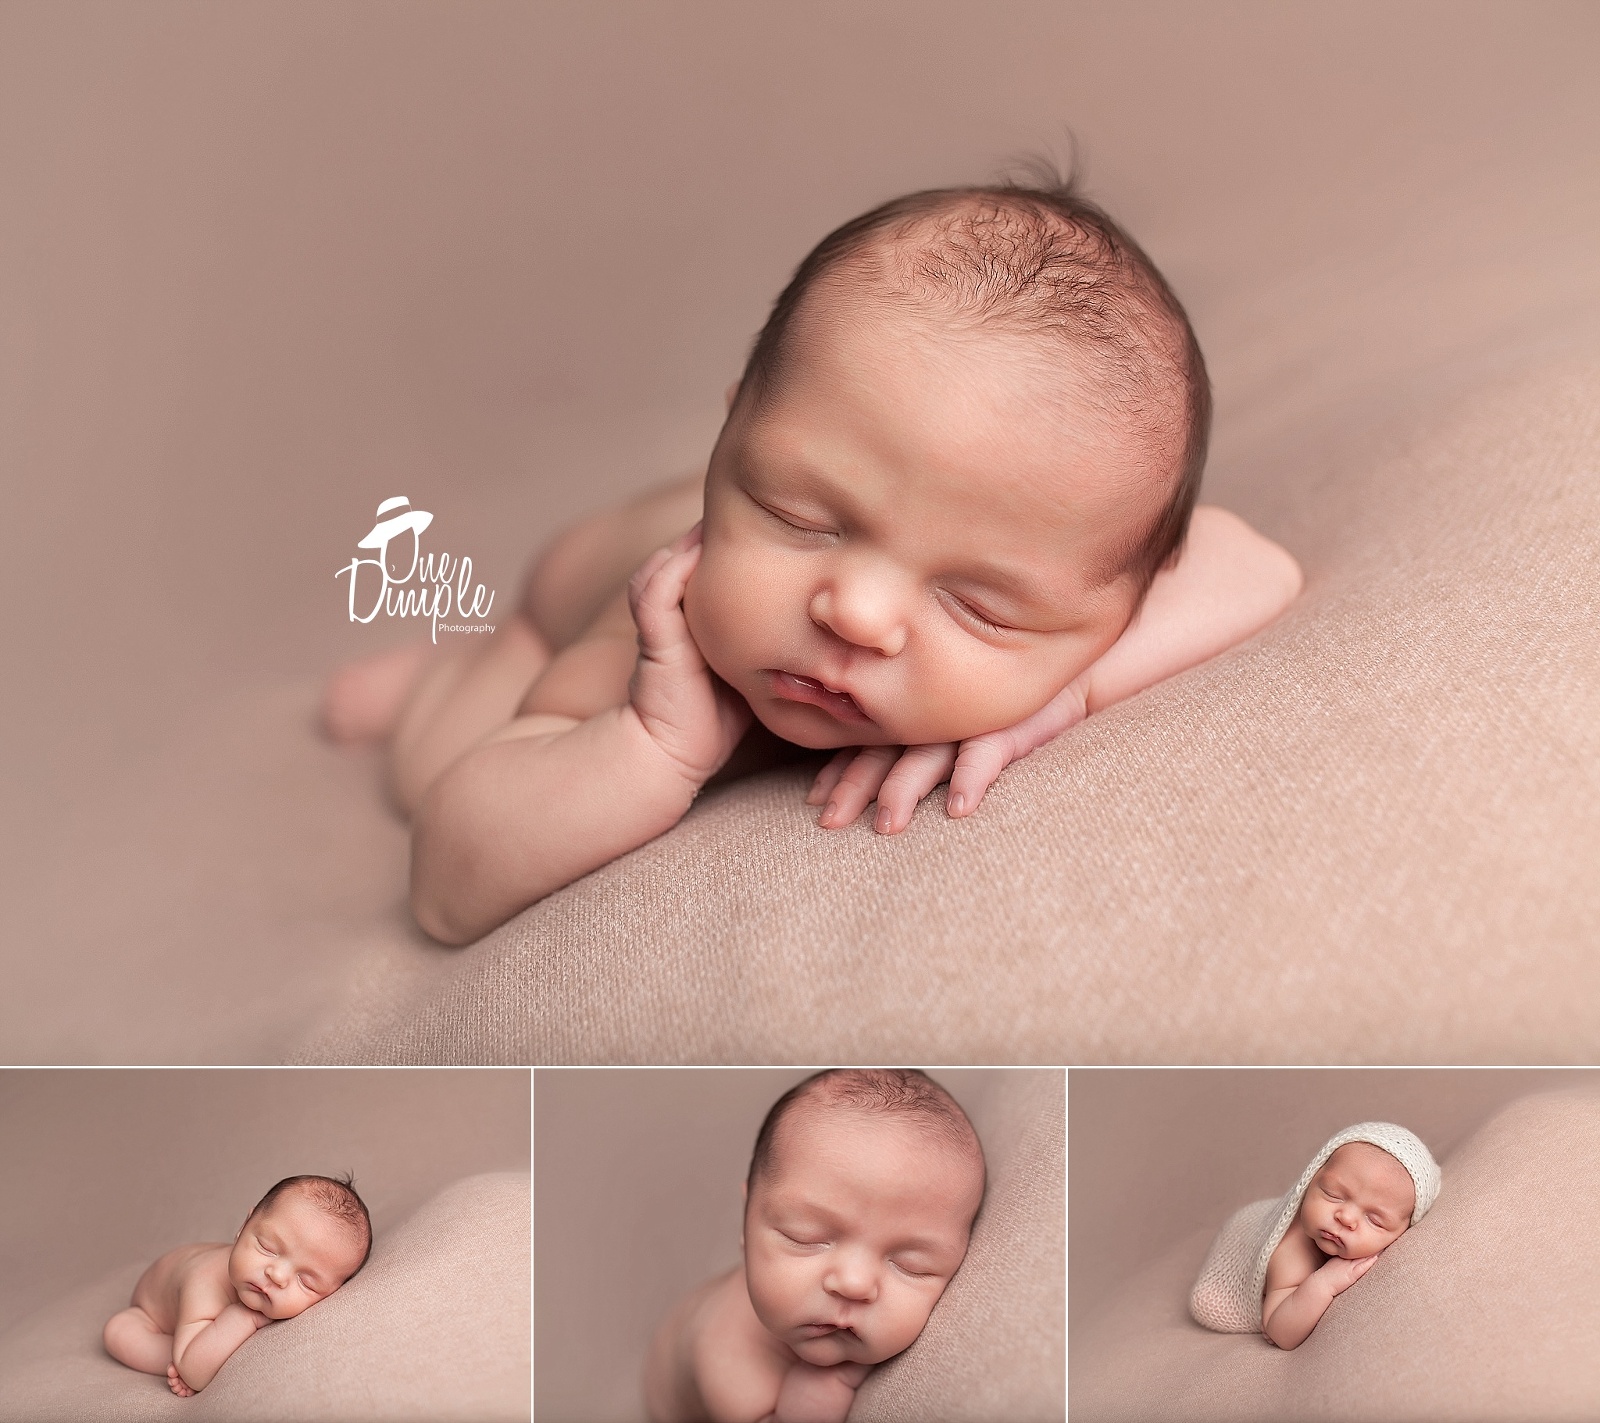 Newborn boy with chin on arms pose